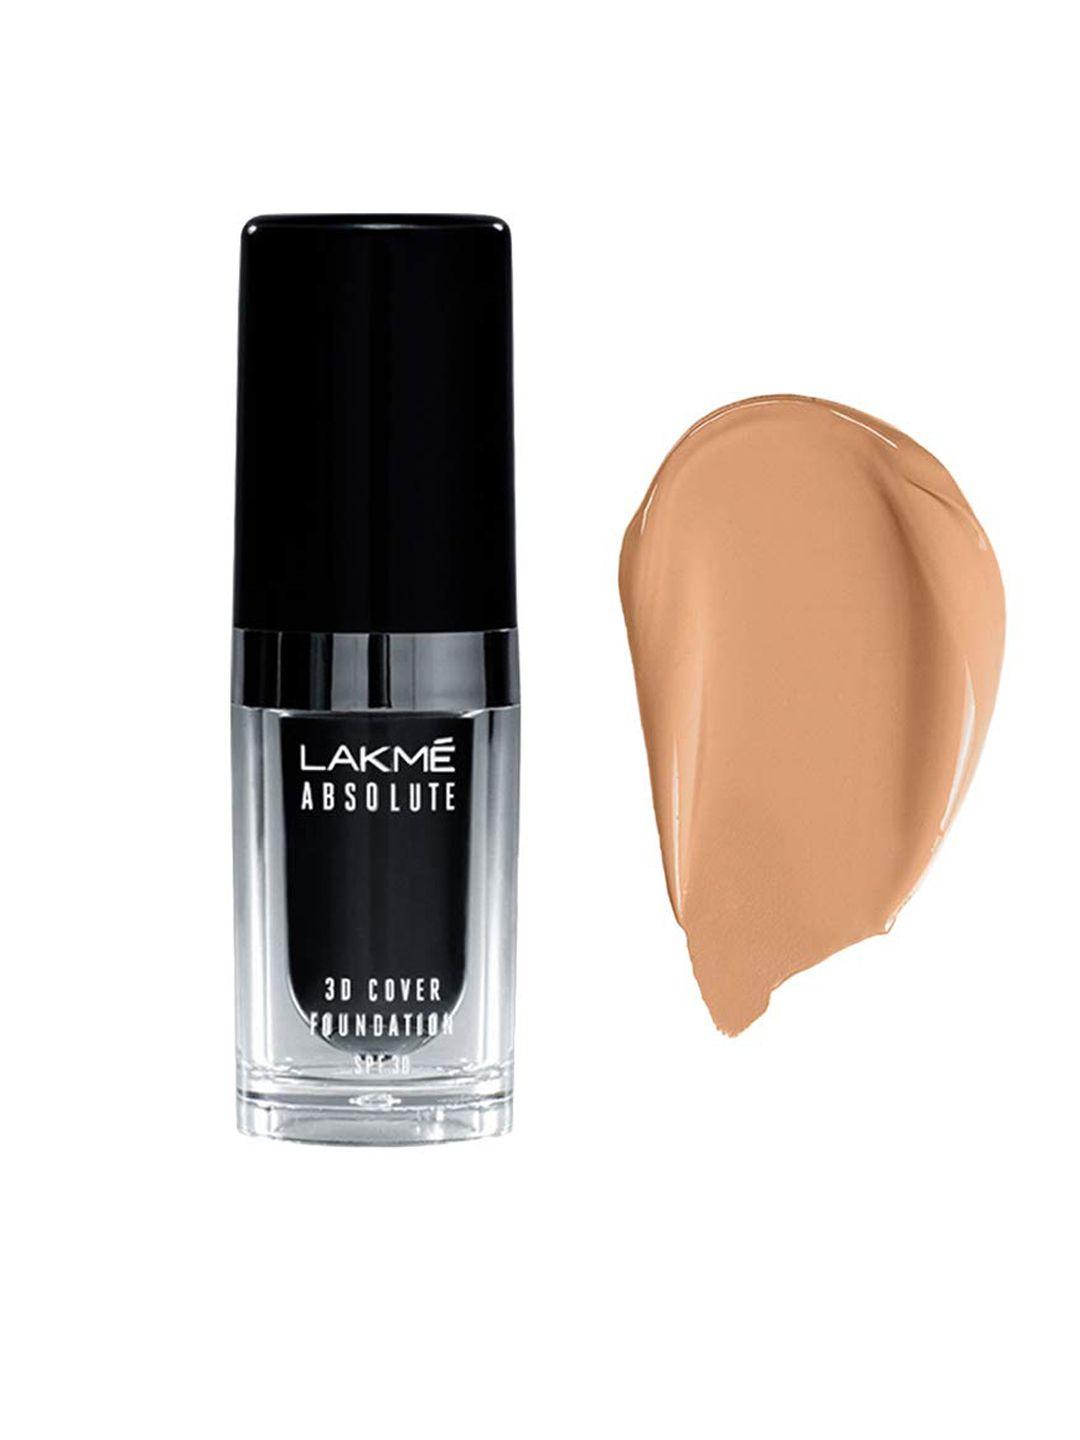 lakme absolute 3d cover spf 30 foundation 15 ml - cool cinnamon c300